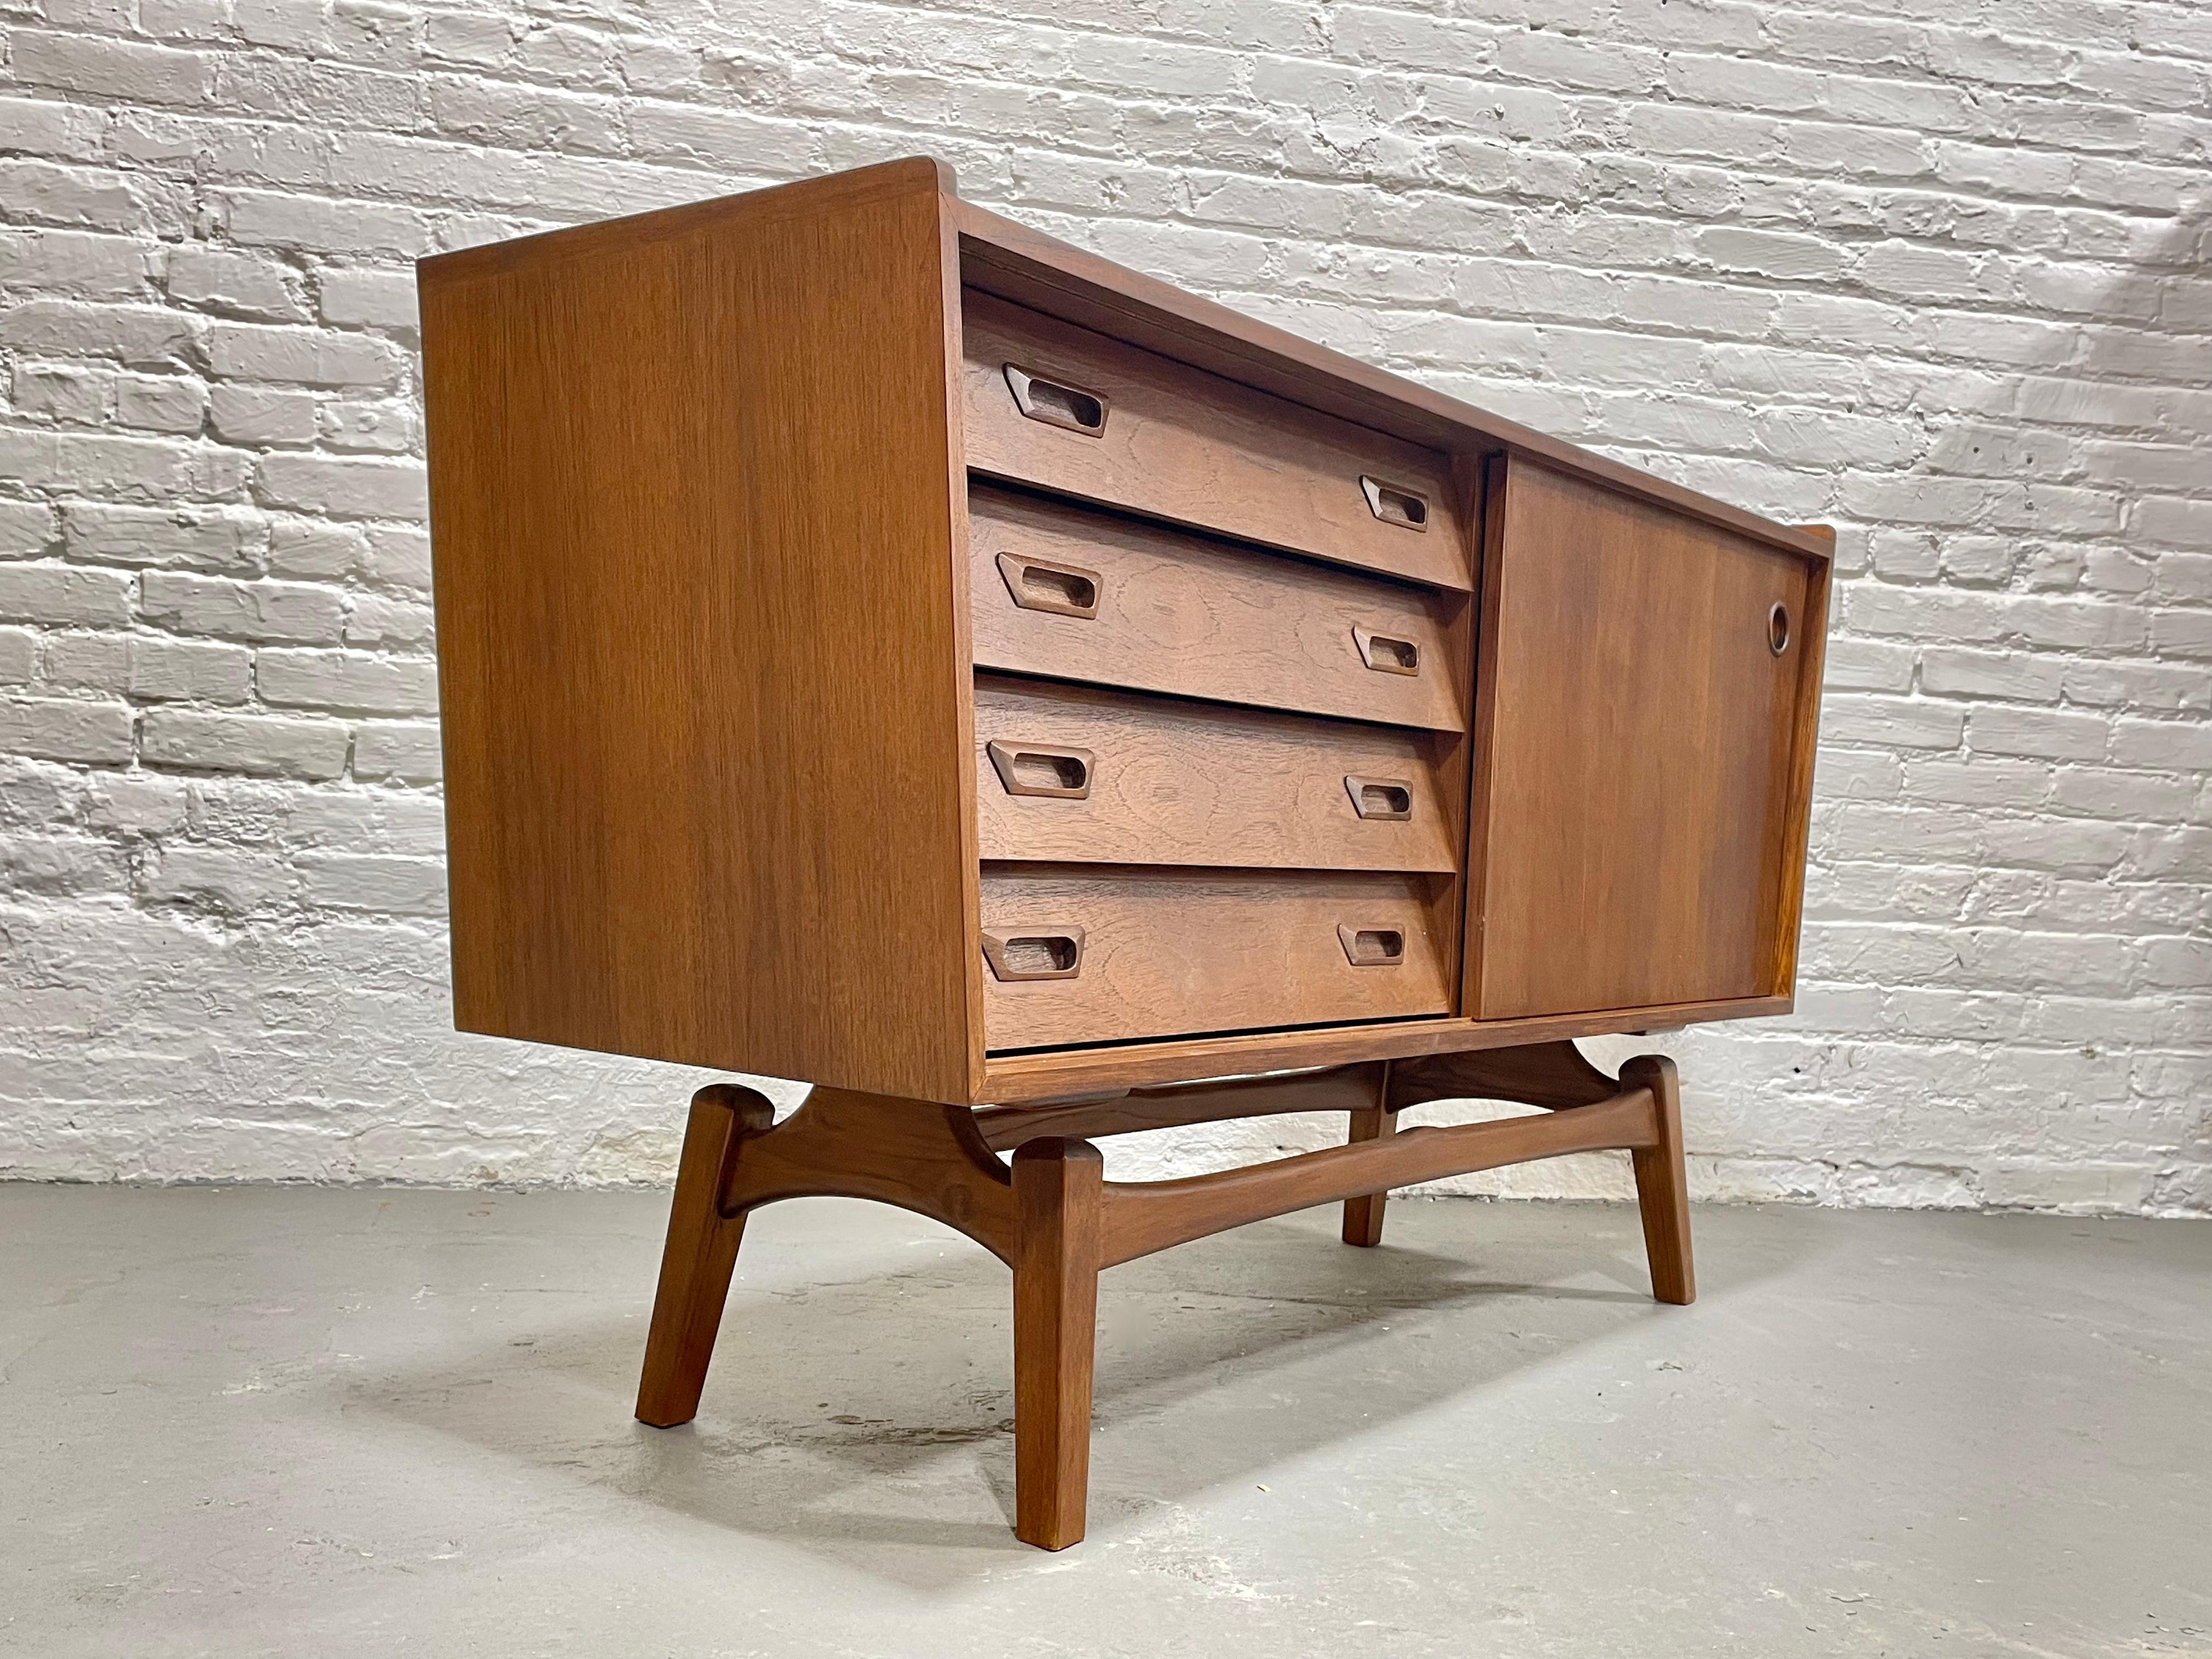 Apartment Sized Mid-Century Modern Styled Floating Teak Credenza / Sideboard For Sale 2